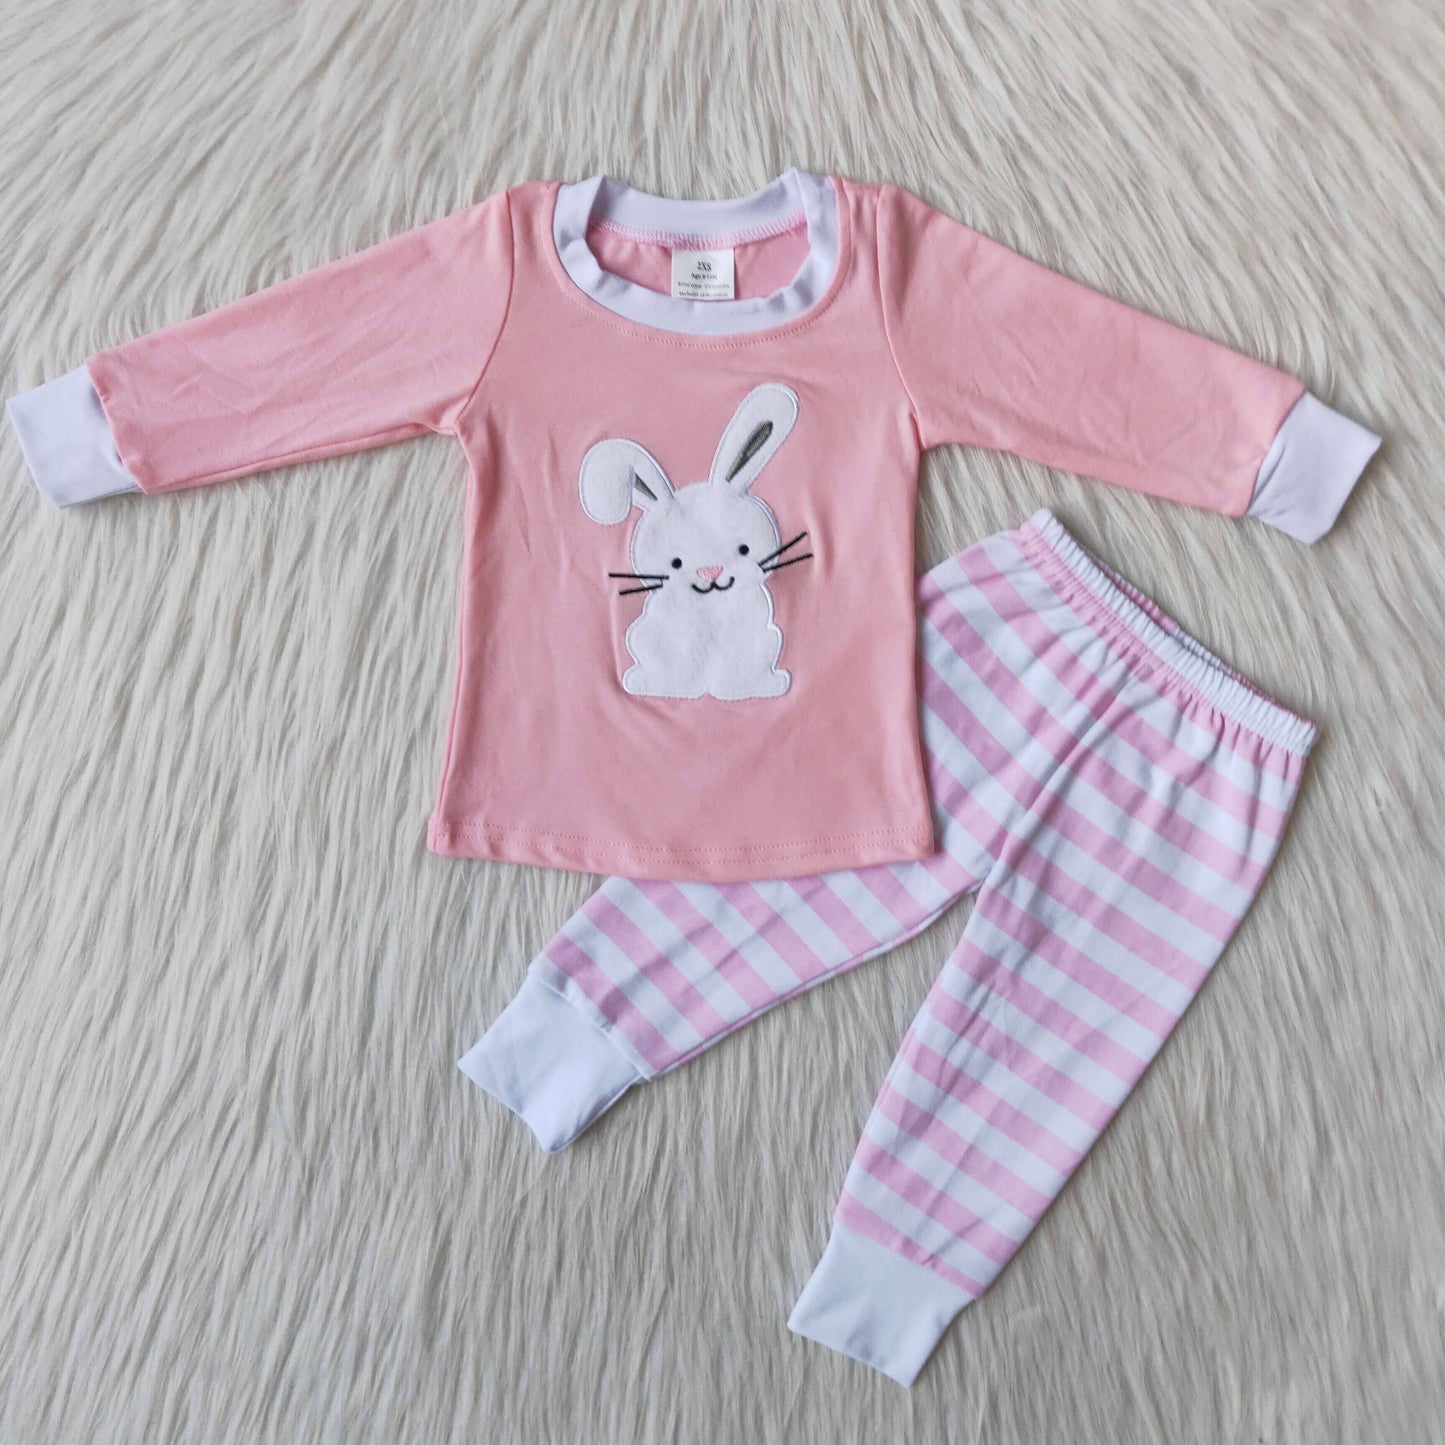 Easter Boy's Pajamas Striped Embroidered Bunny 2 pc sets